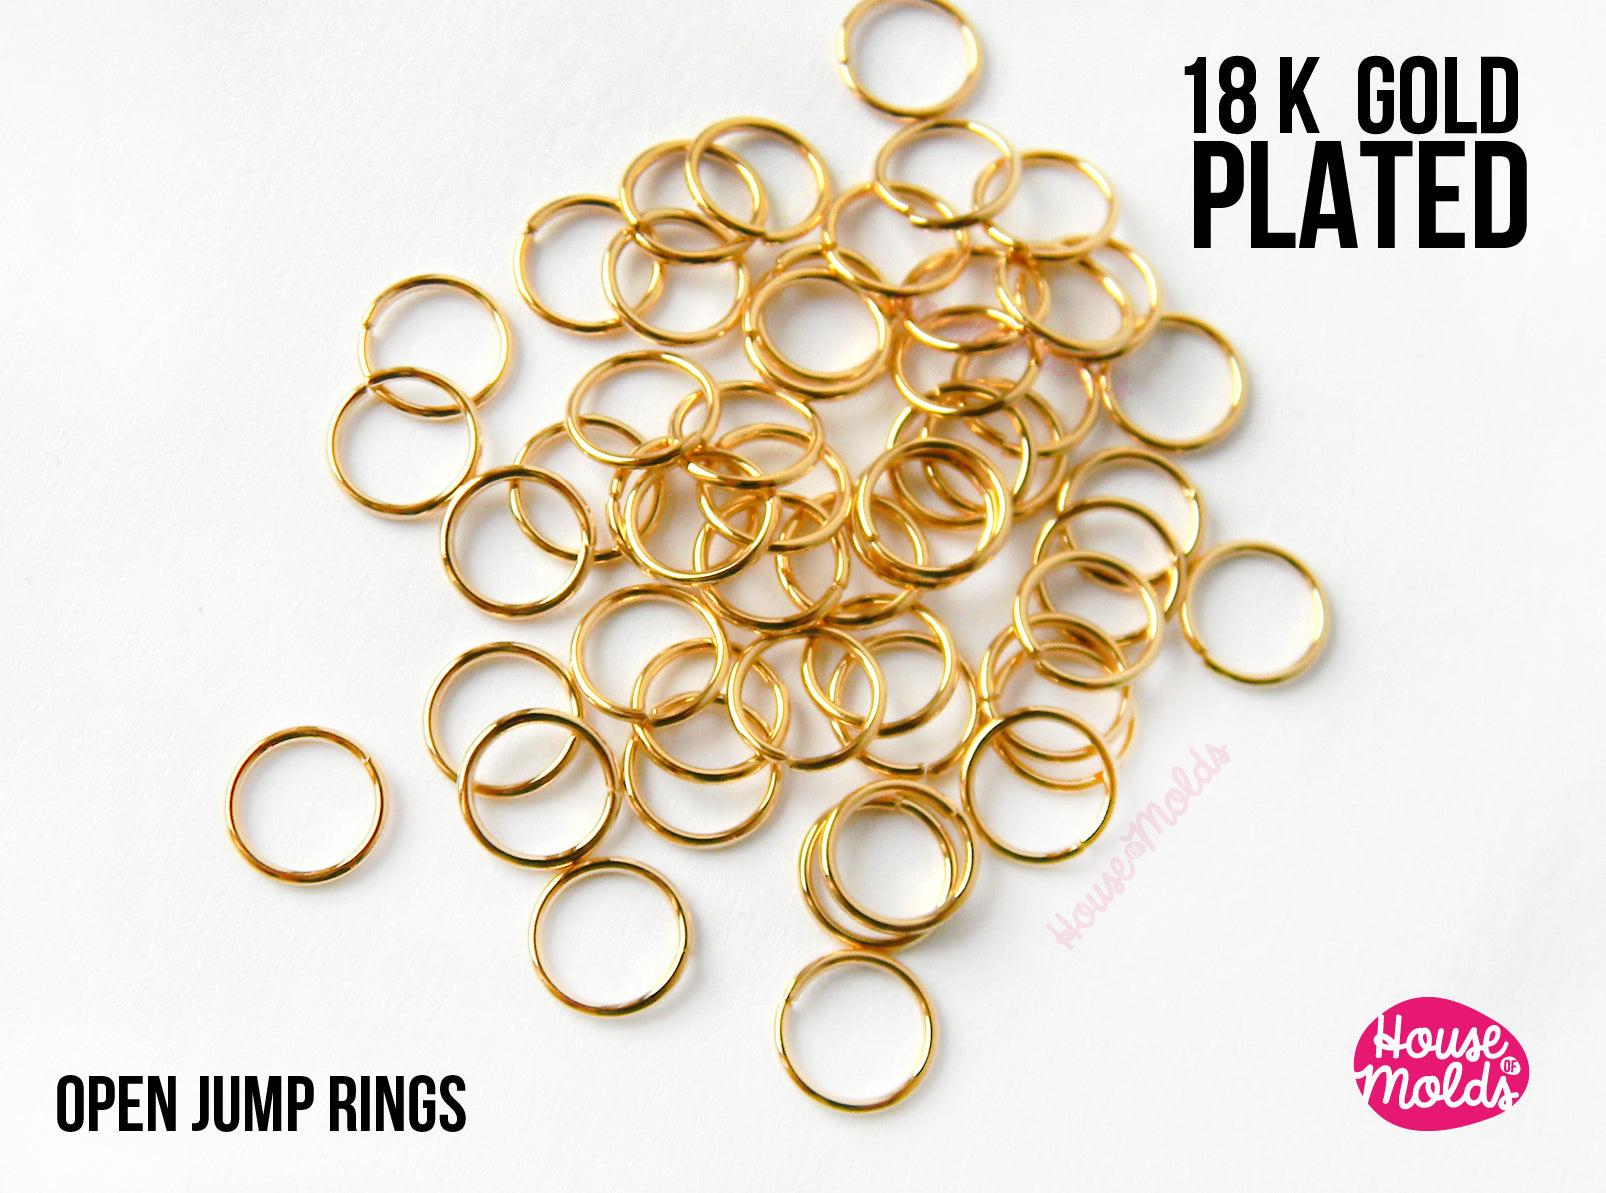 18K Gold Plated Open Jump Rings - 4 to 8 mm external diameters